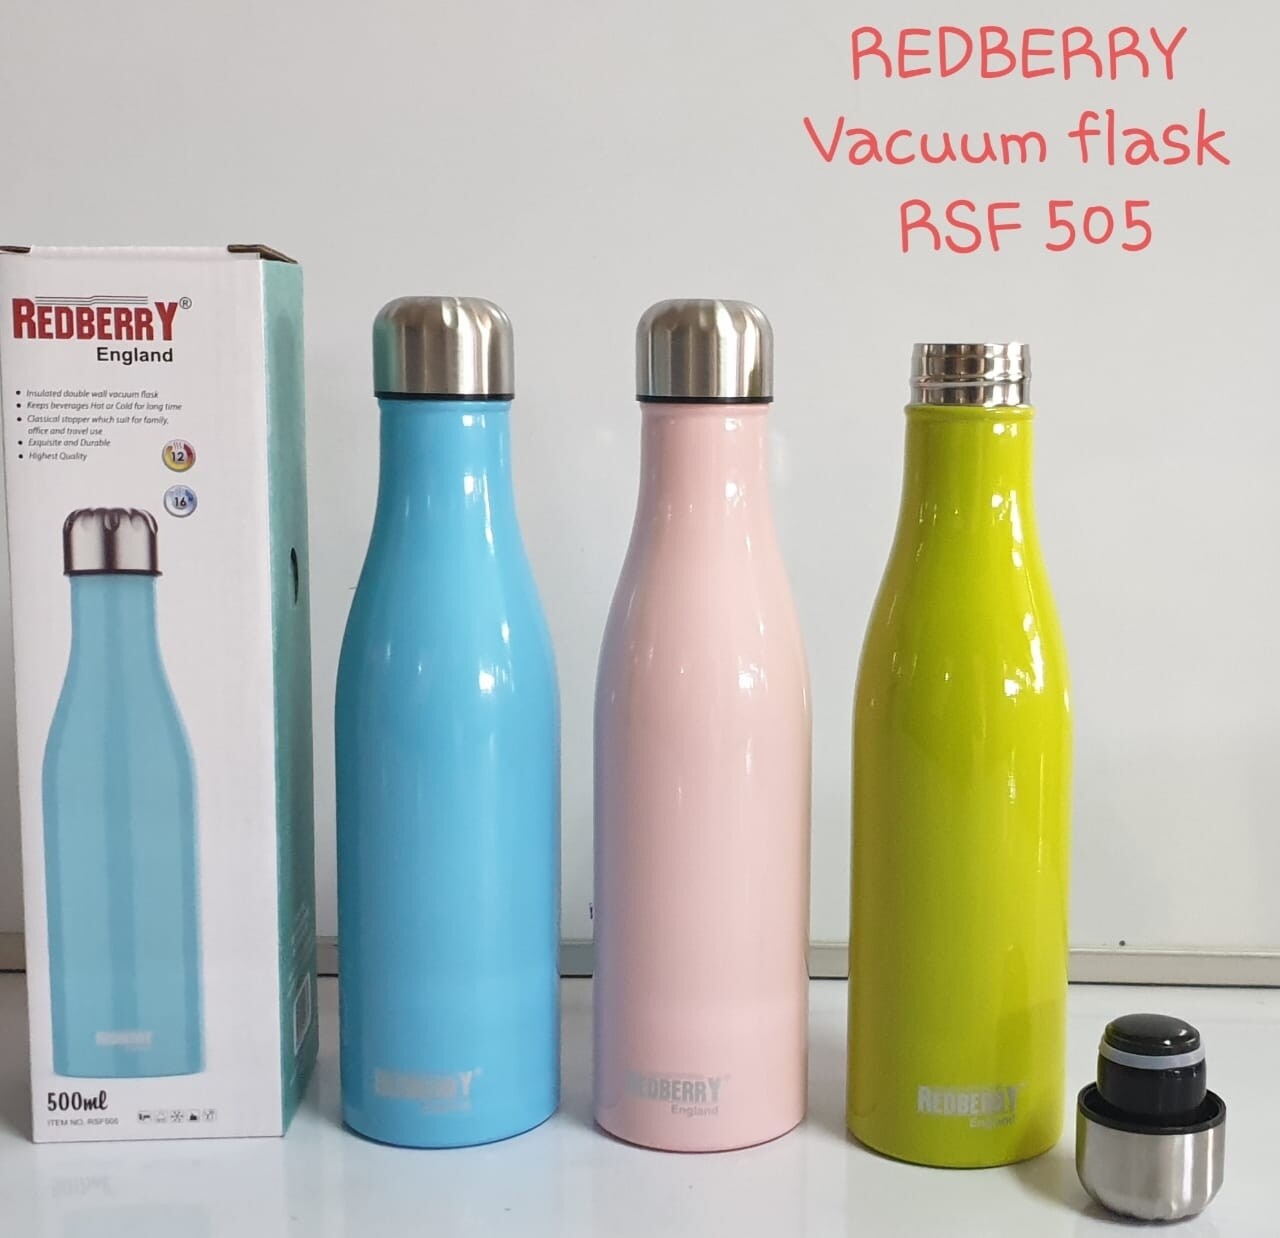 Redberry unbreakable Green vacuum flask 500ml #RSF505 Perfect for branding